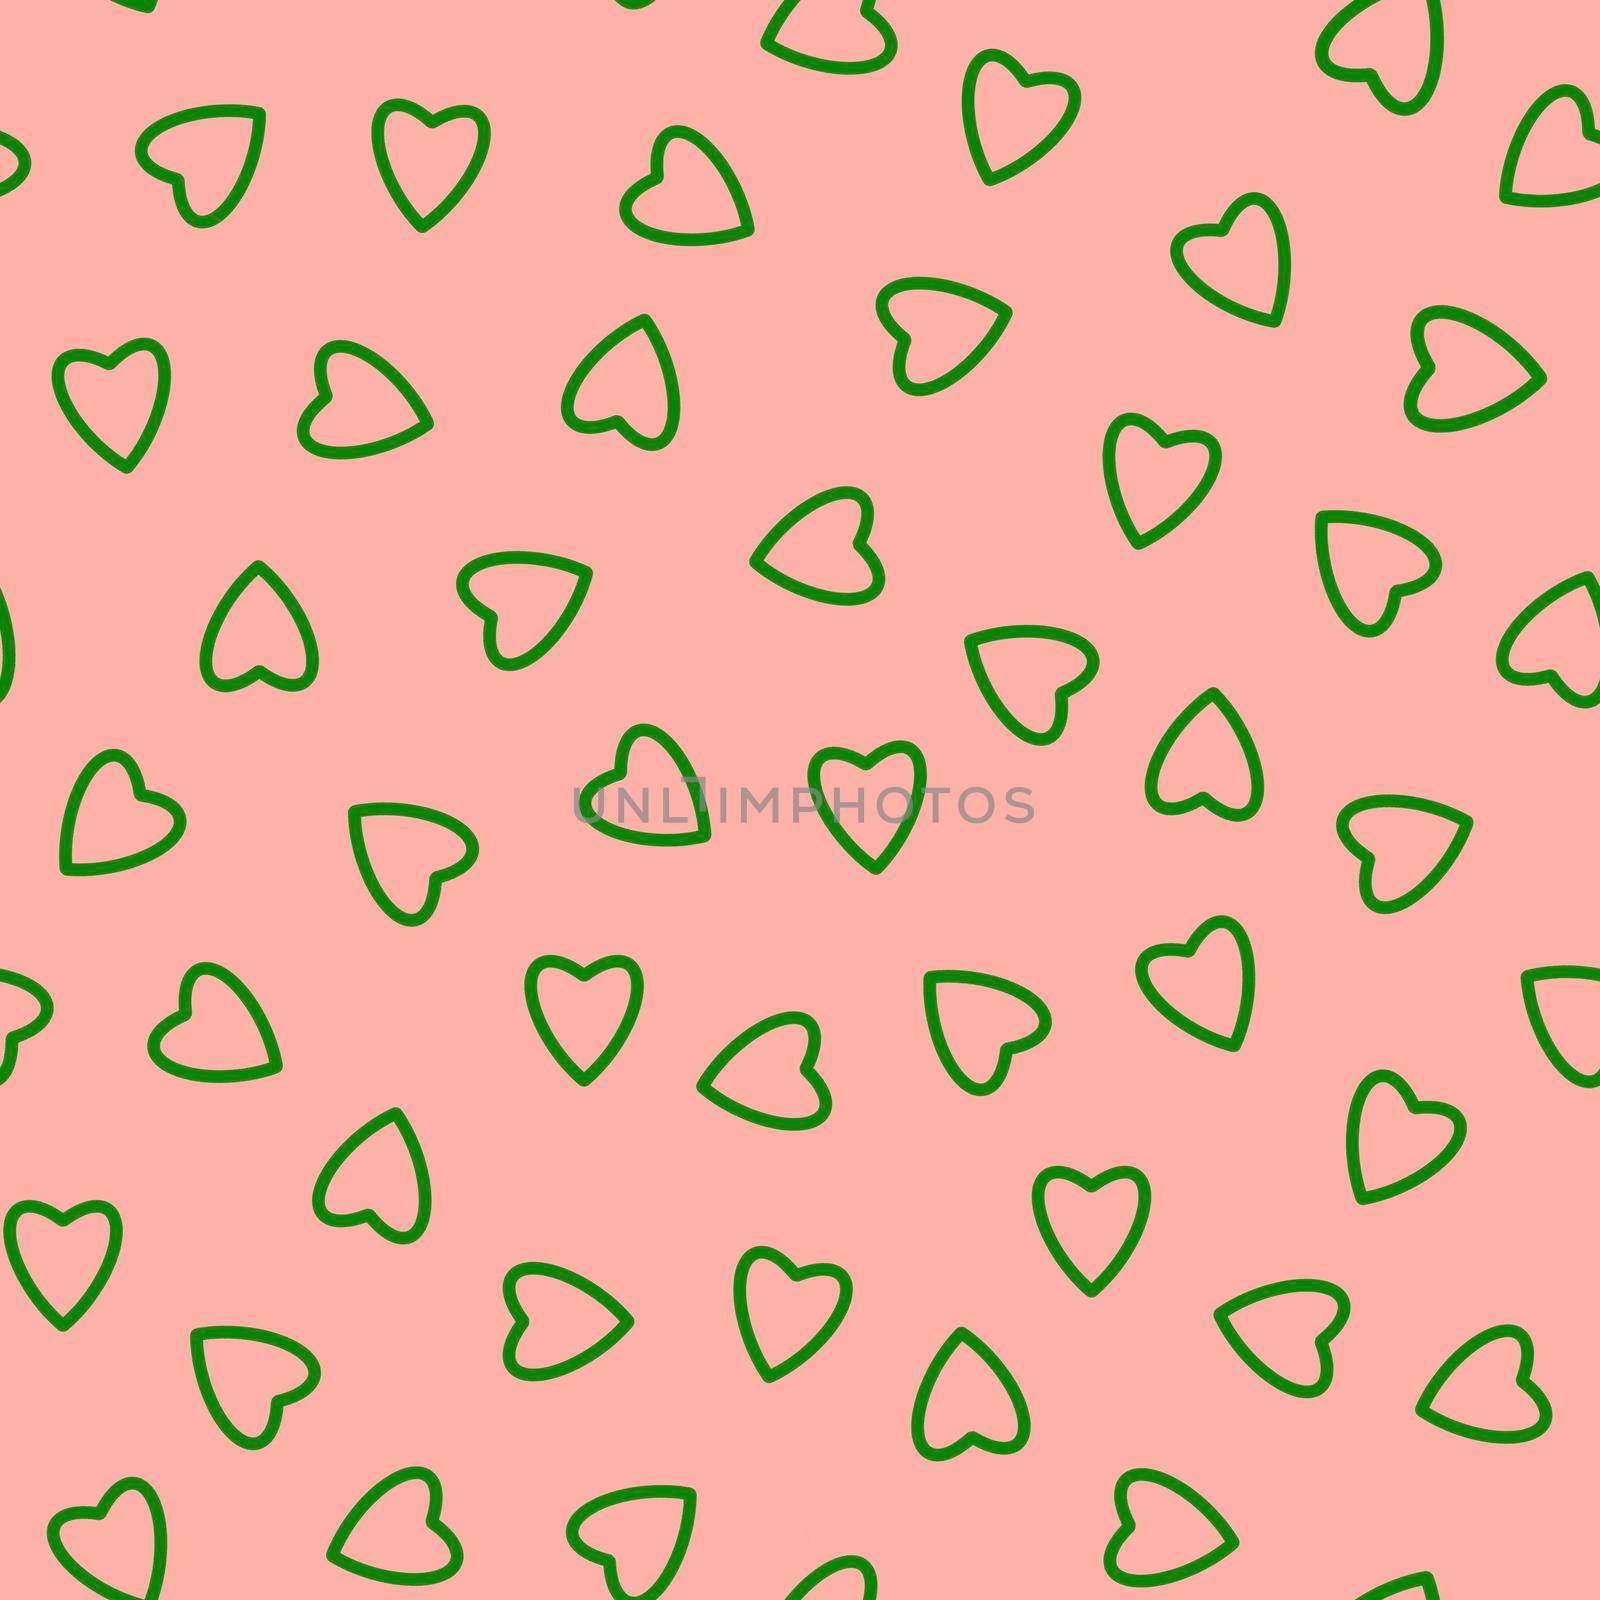 Simple hearts seamless pattern,endless chaotic texture made of tiny heart silhouettes.Valentines,mothers day background.Great for Easter,wedding,scrapbook,gift wrapping paper,textiles.Green on pink by Angelsmoon